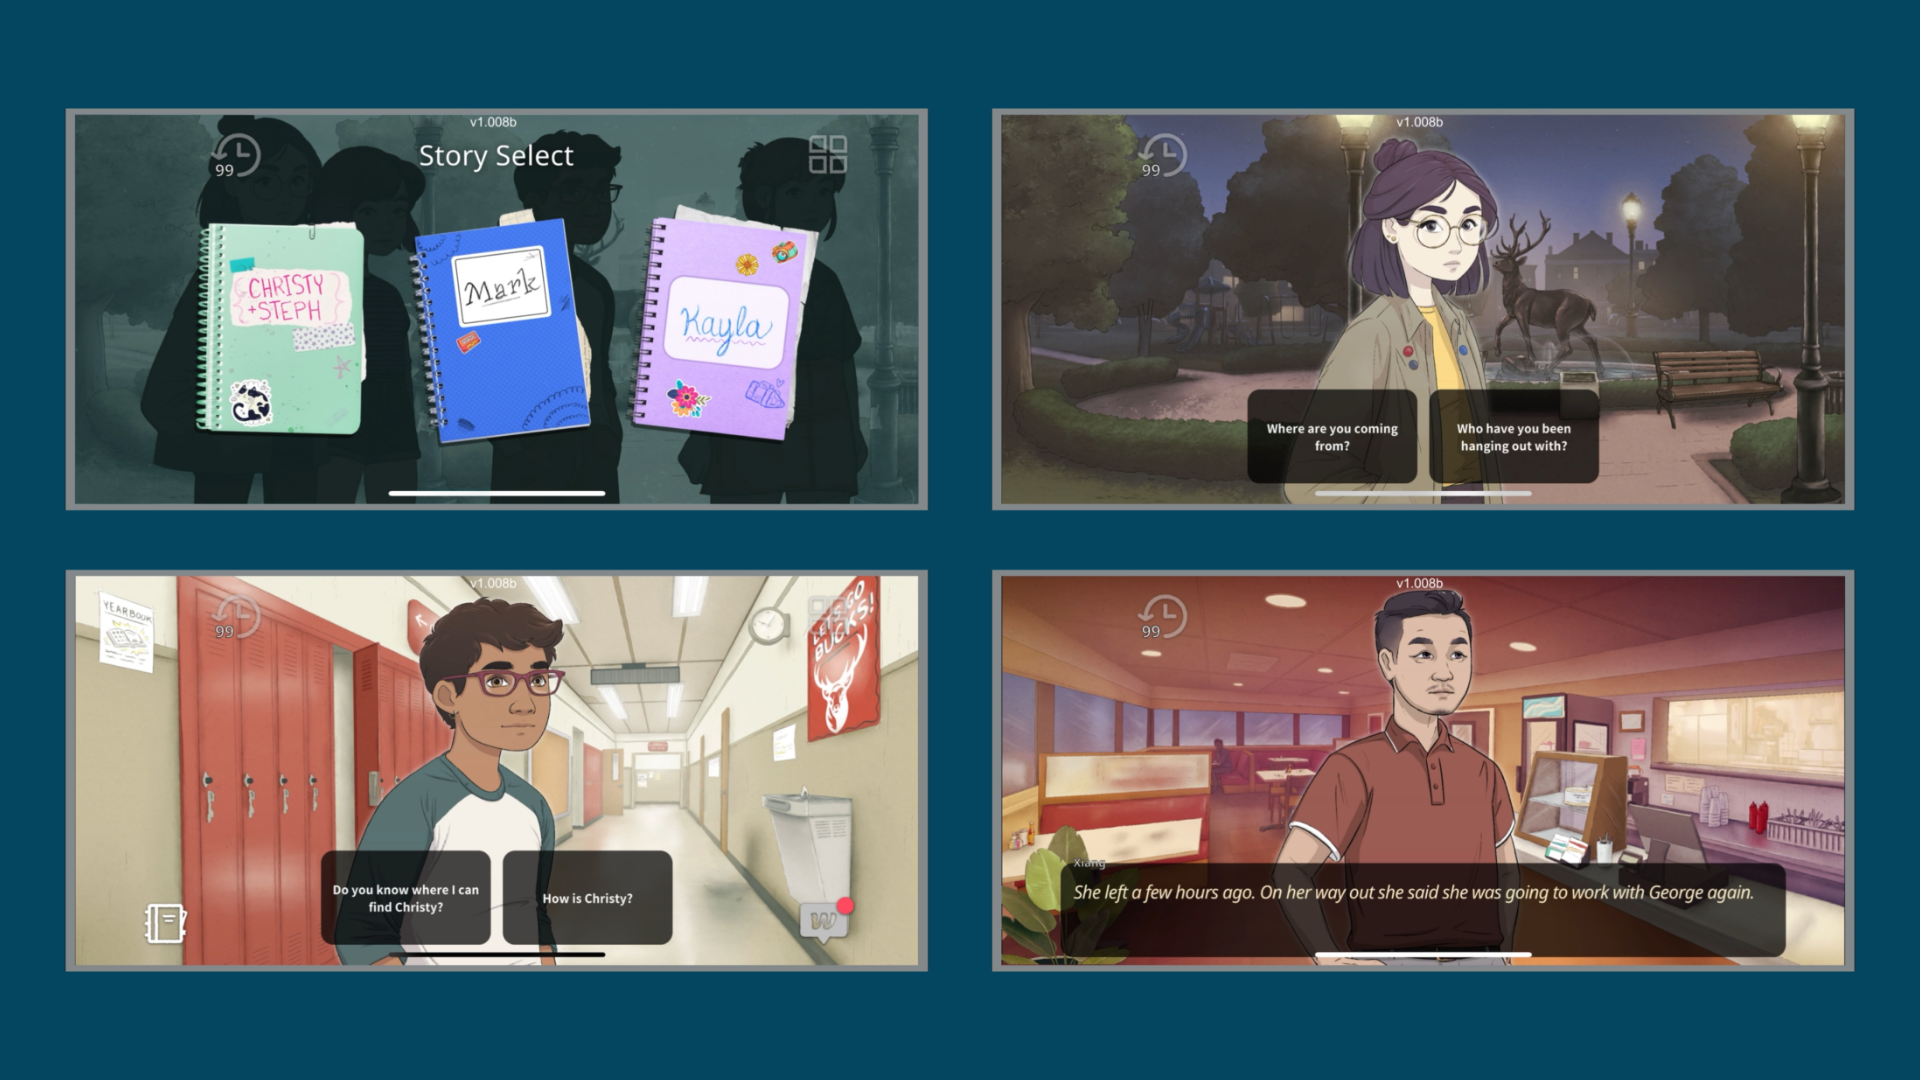 Classroom Learning Game Screenshots with Diverse Characters and Situations